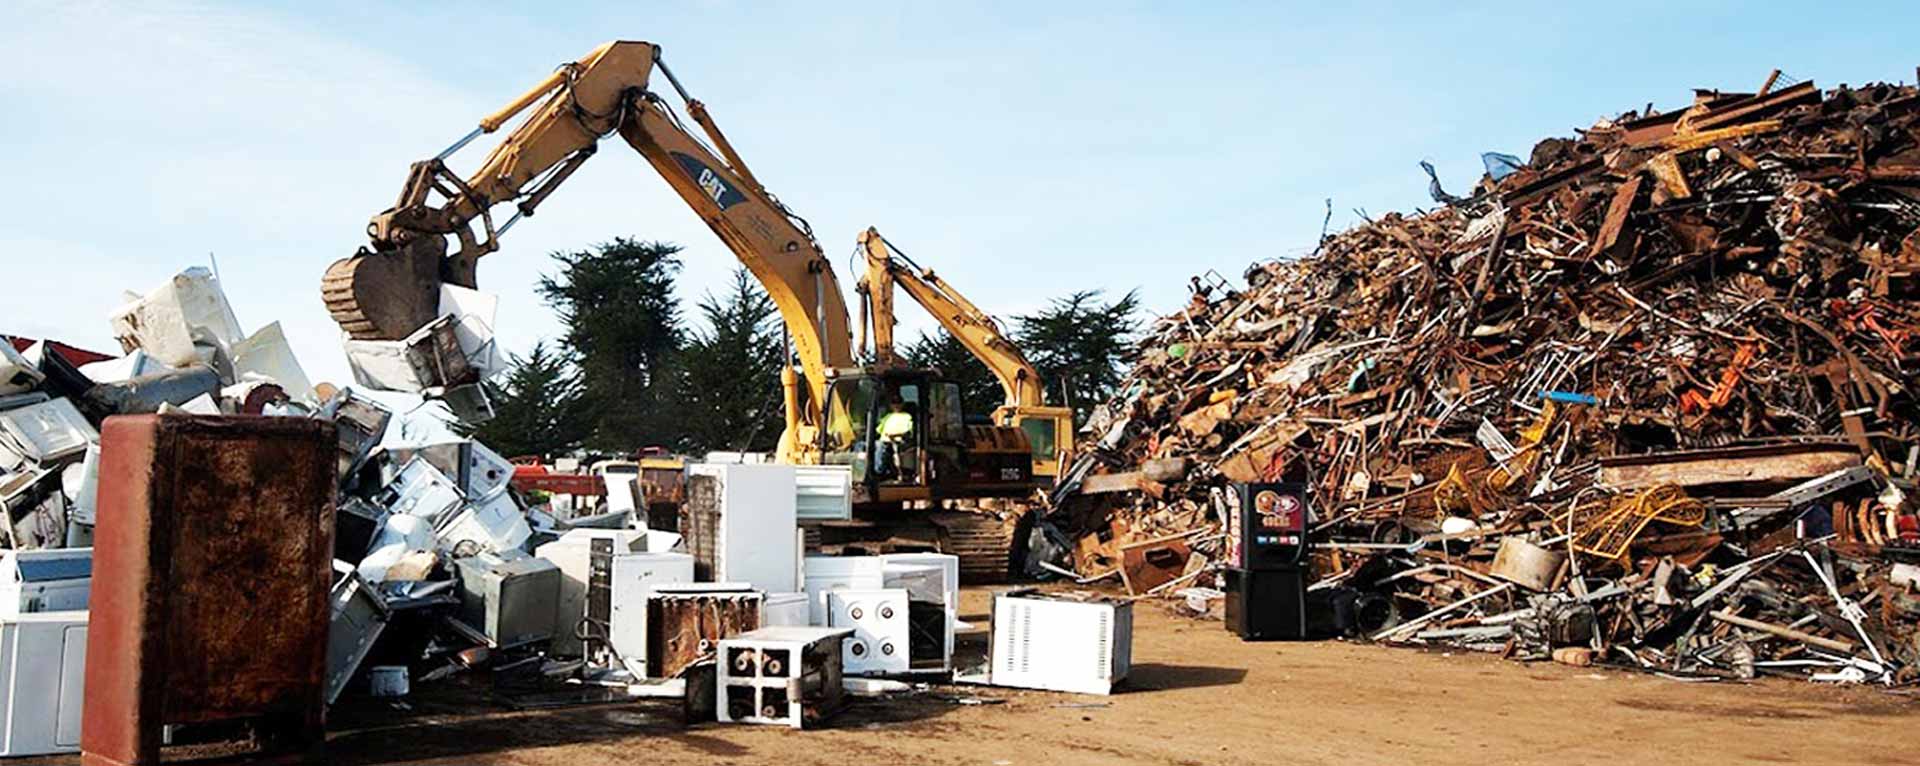 scrap metal purchasers near me